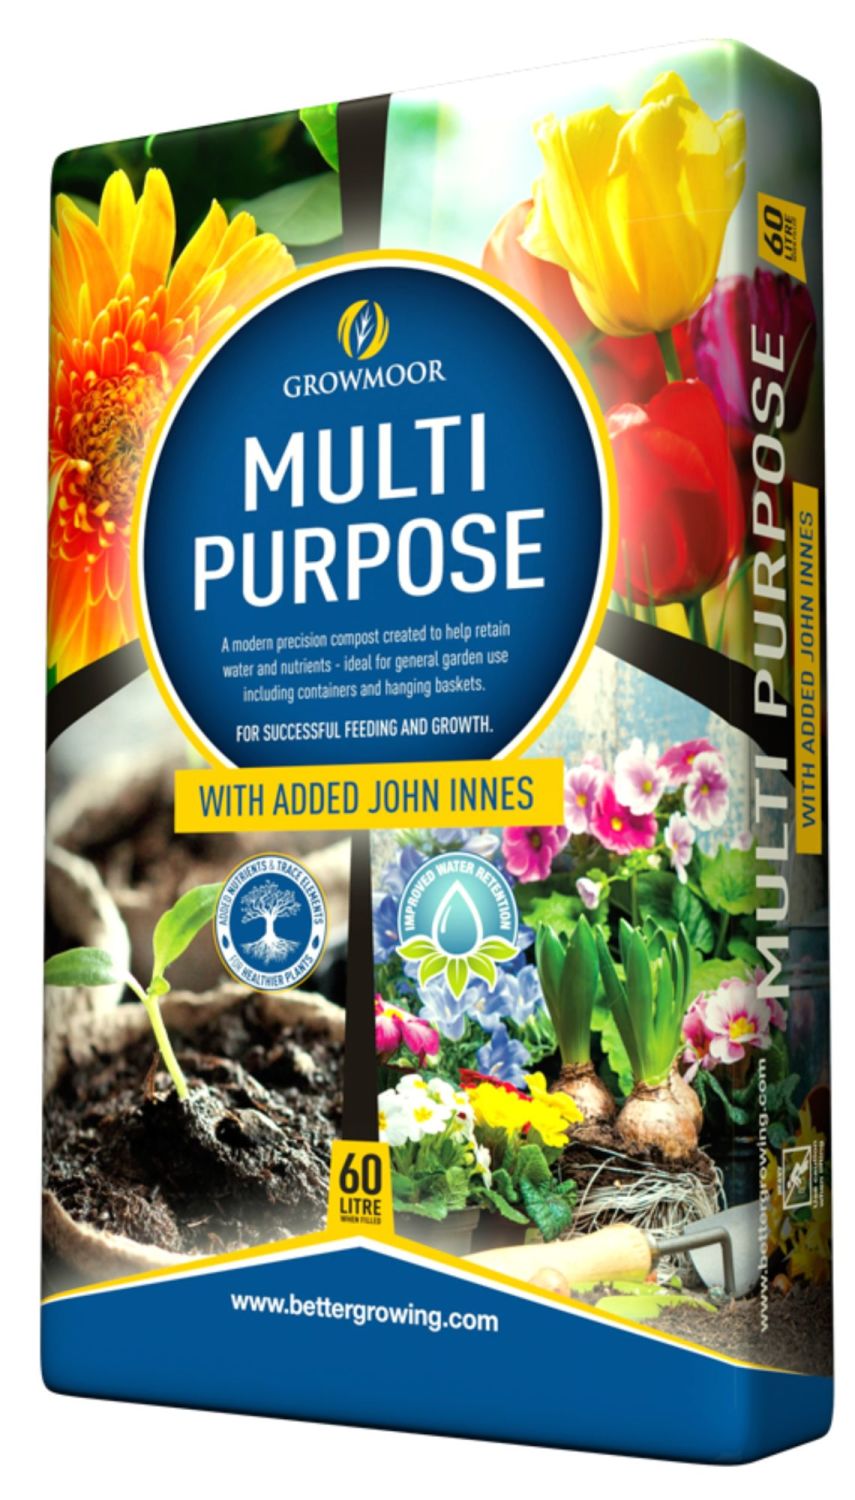 MULTI-PURPOSE COMPOST WITH ADDED JOHN INNES